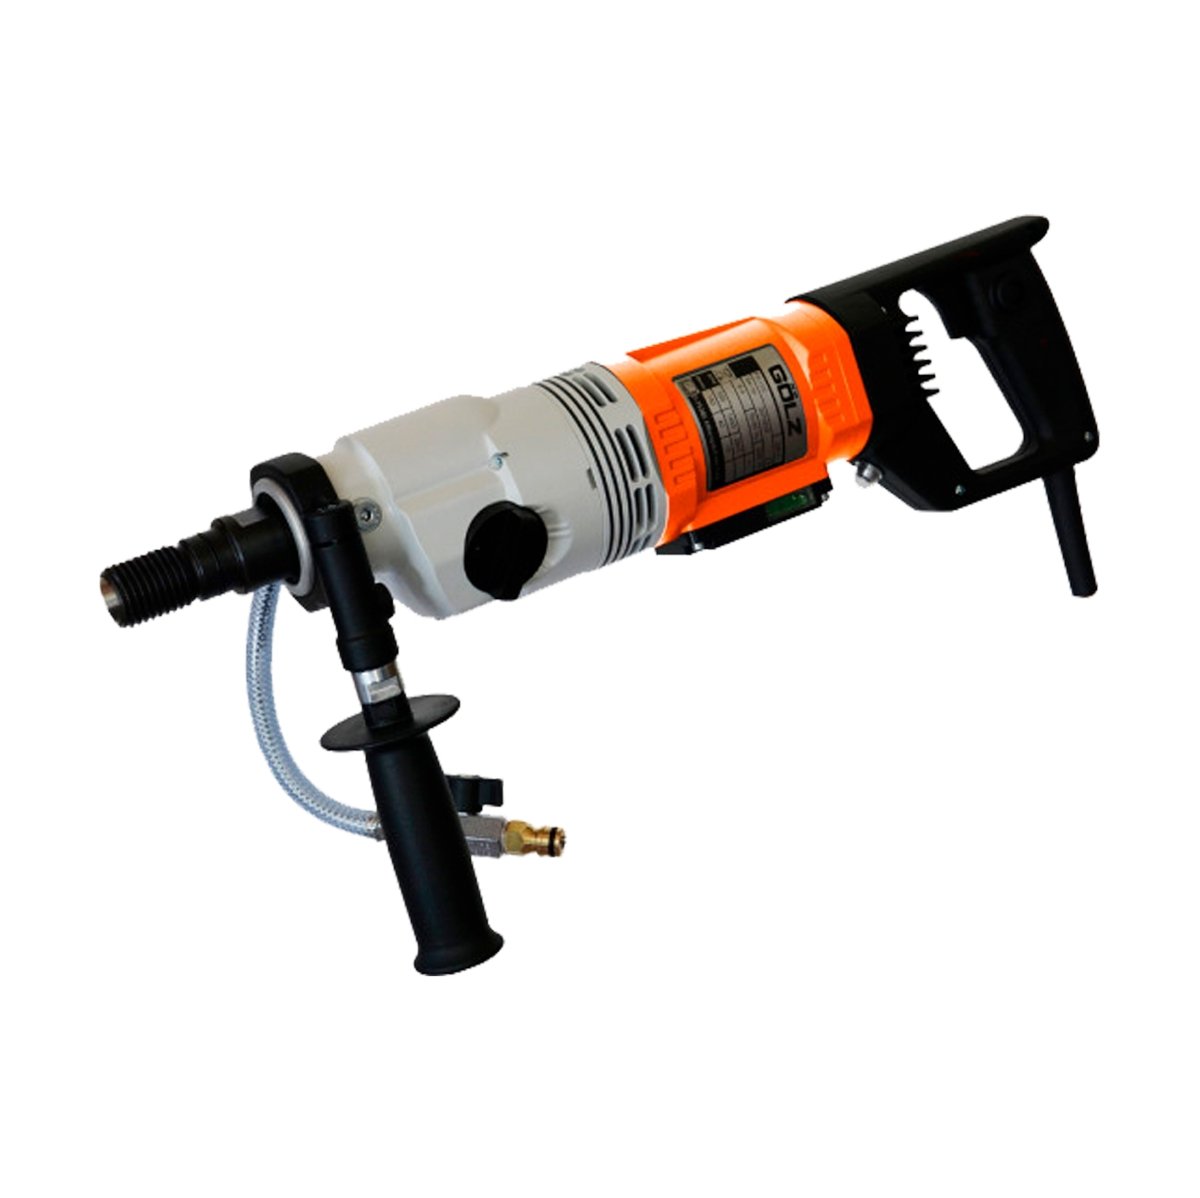 GOLZ Hand Held Core Drill FB33S